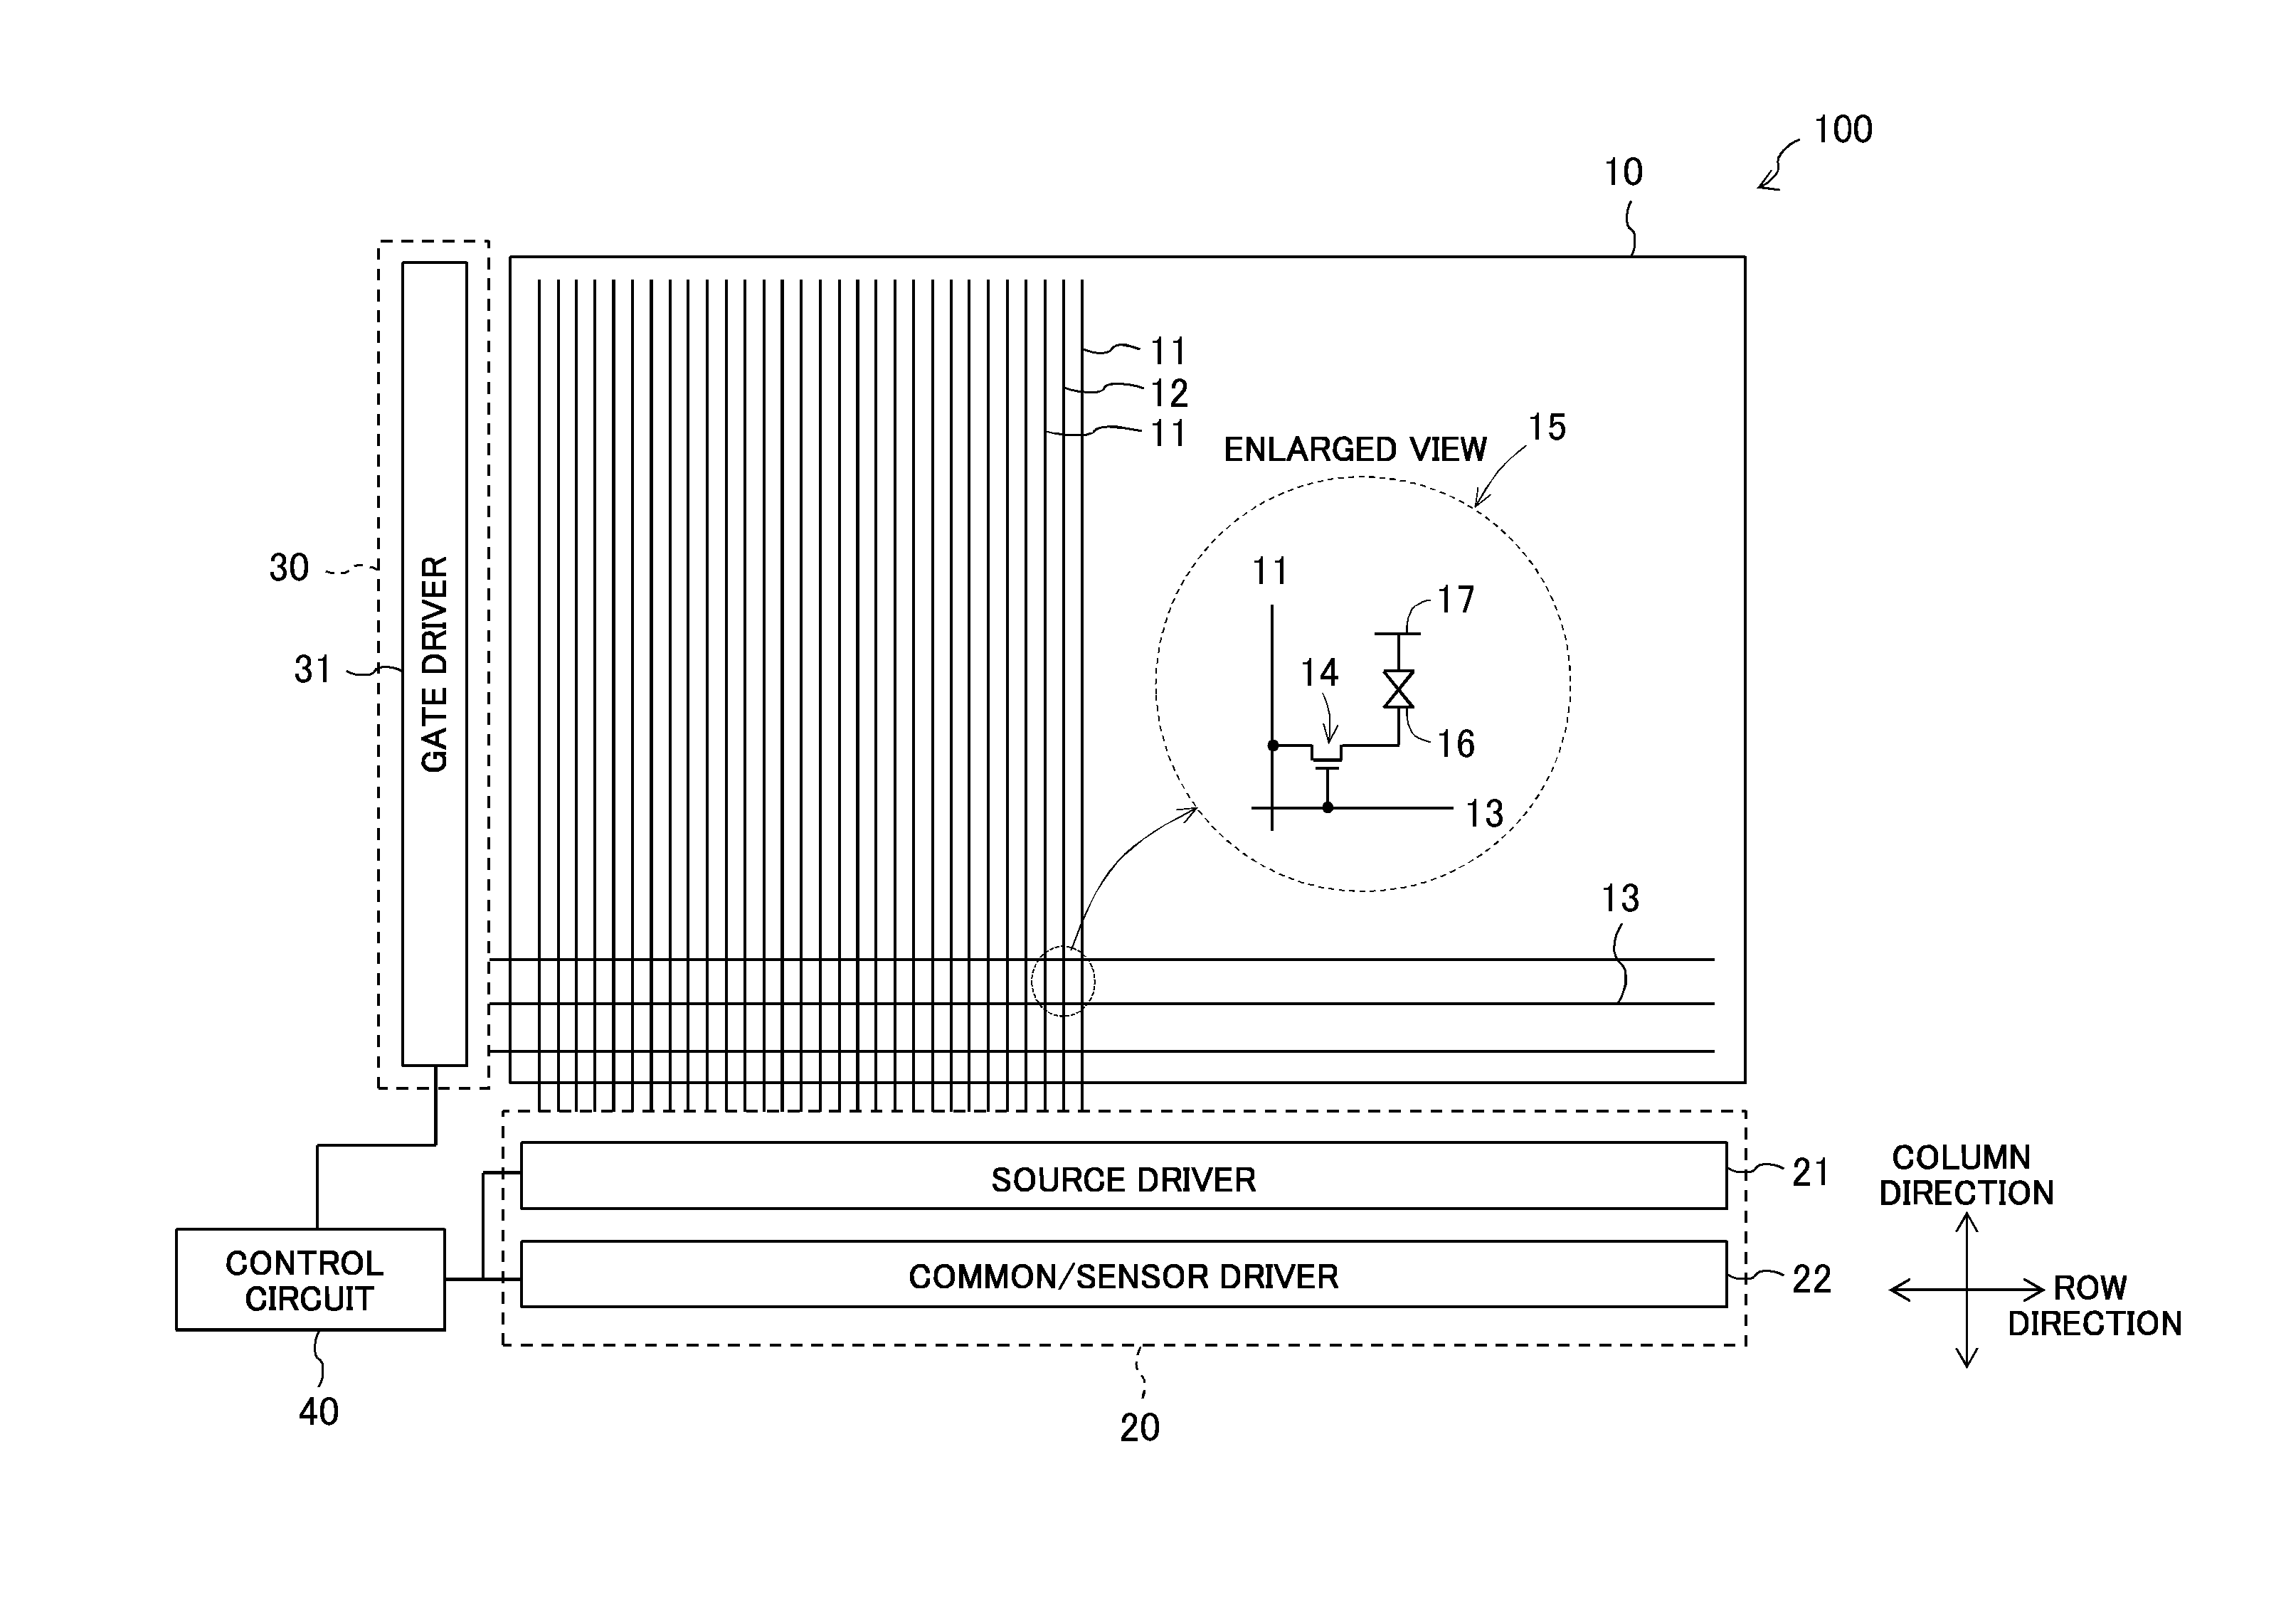 Display panel with touch detection function